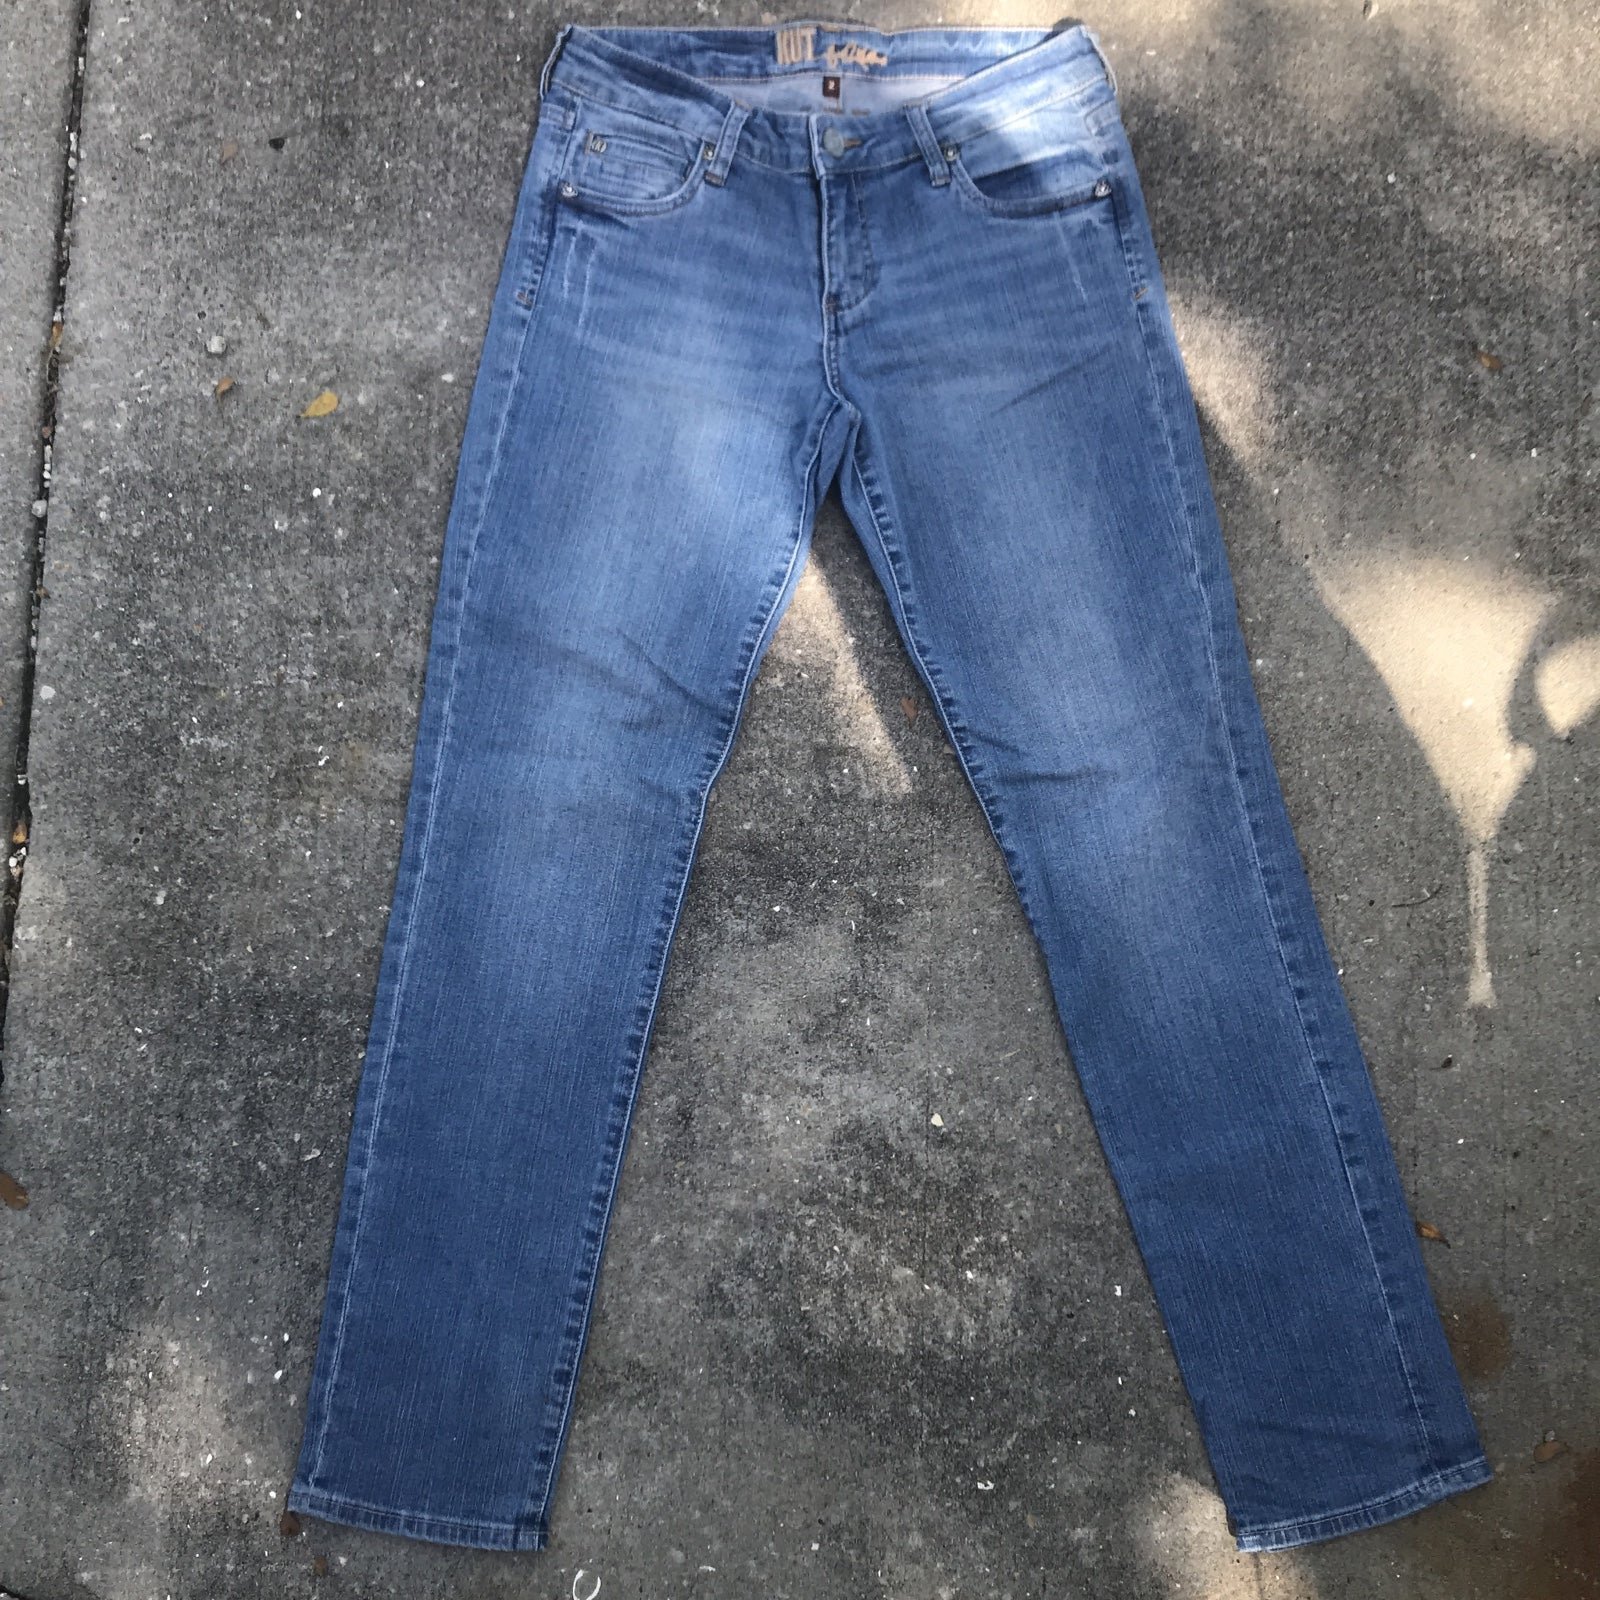 large selection Kut from the Kloth Slim Leg Jeans Size 2 / #14-238 oJy6ebl5u on sale